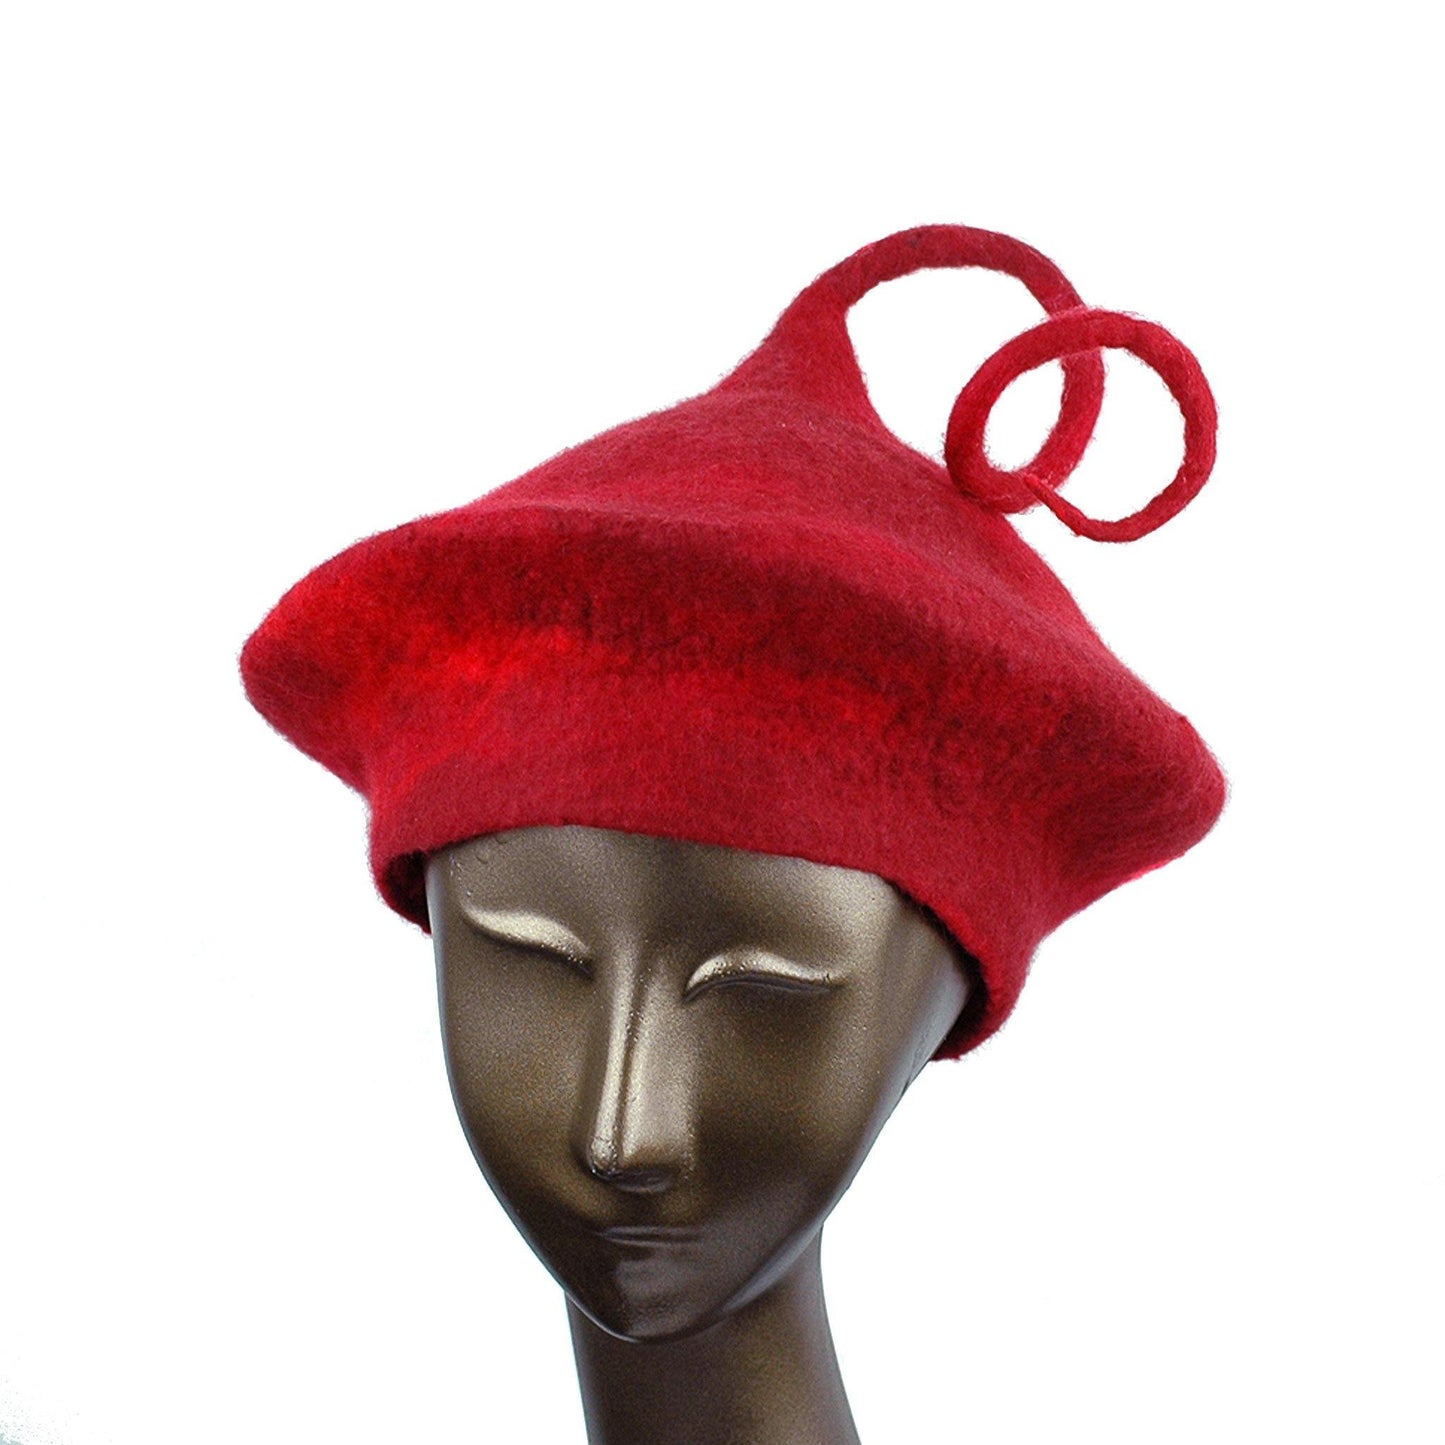 Custom Red Beret with Medium Curlicue - front view